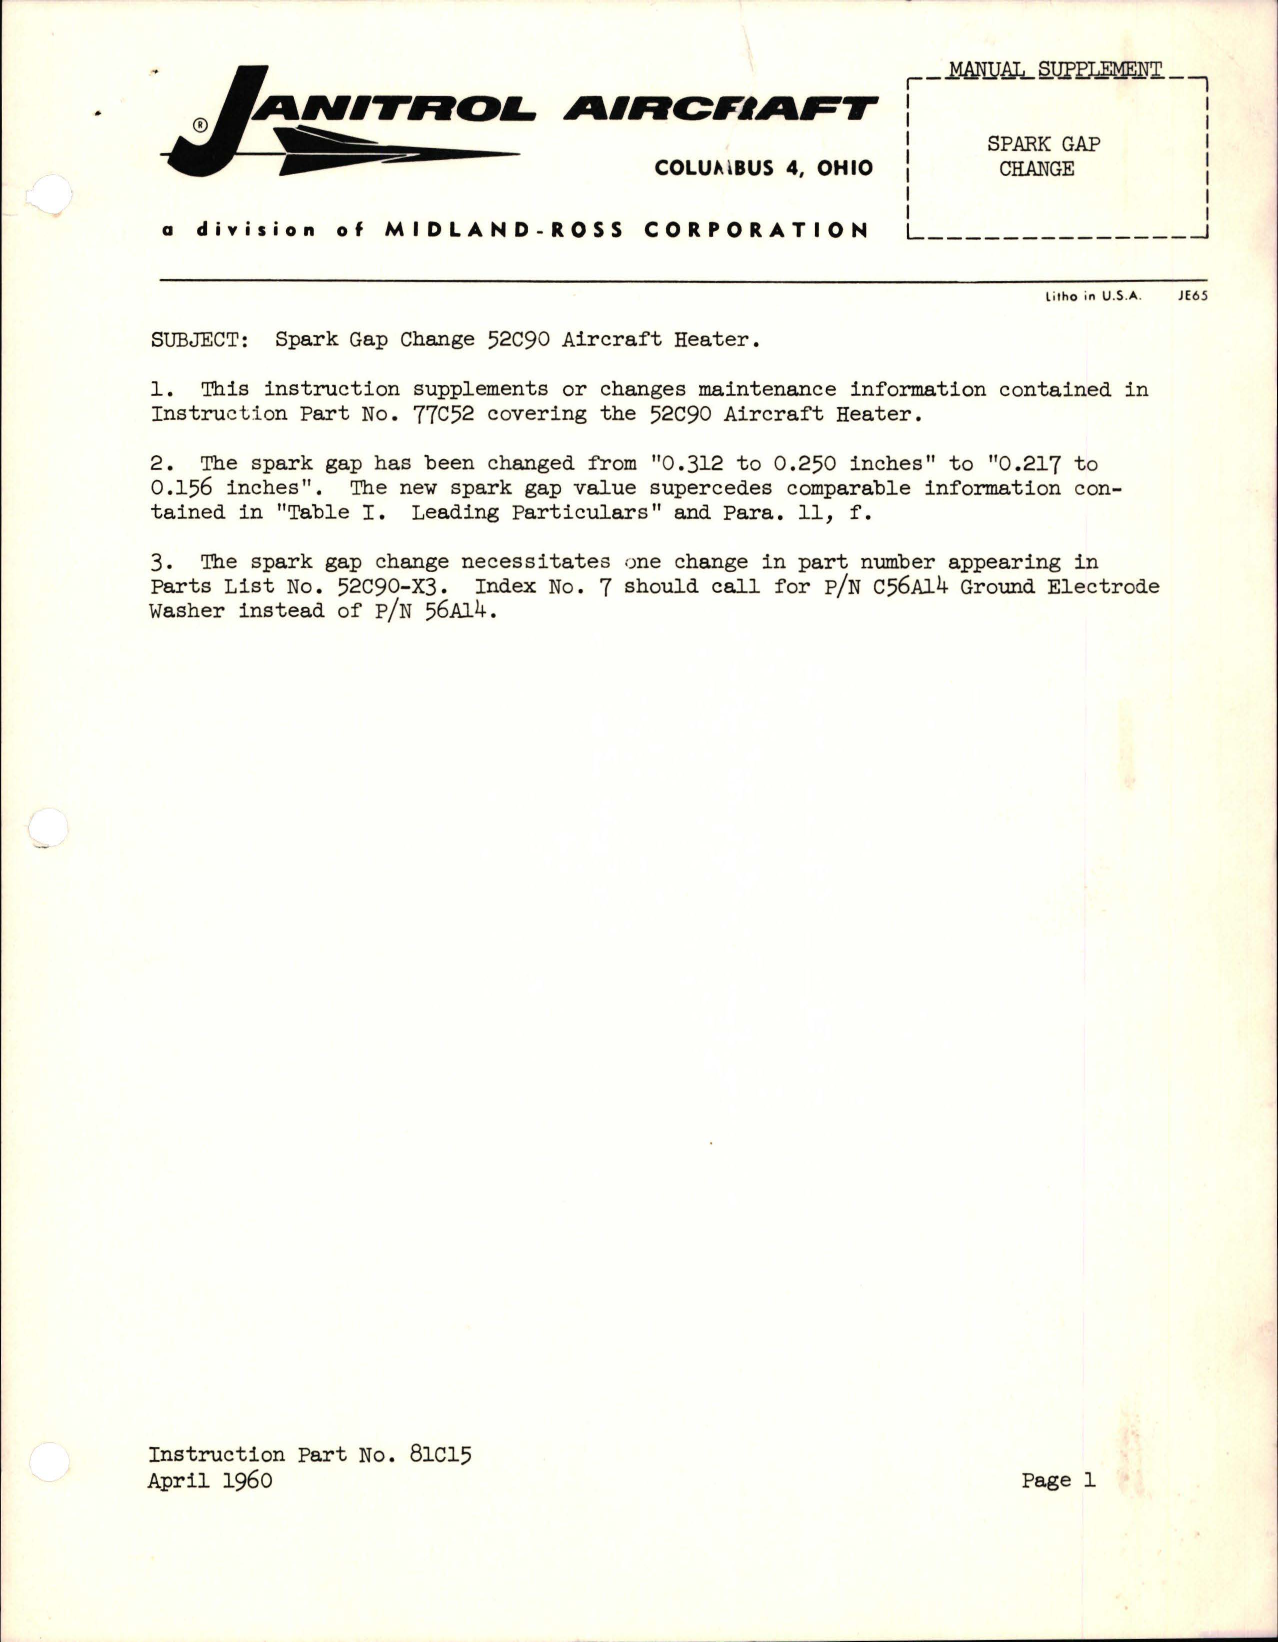 Sample page 1 from AirCorps Library document: Manual Supplement for Spark Gap Change